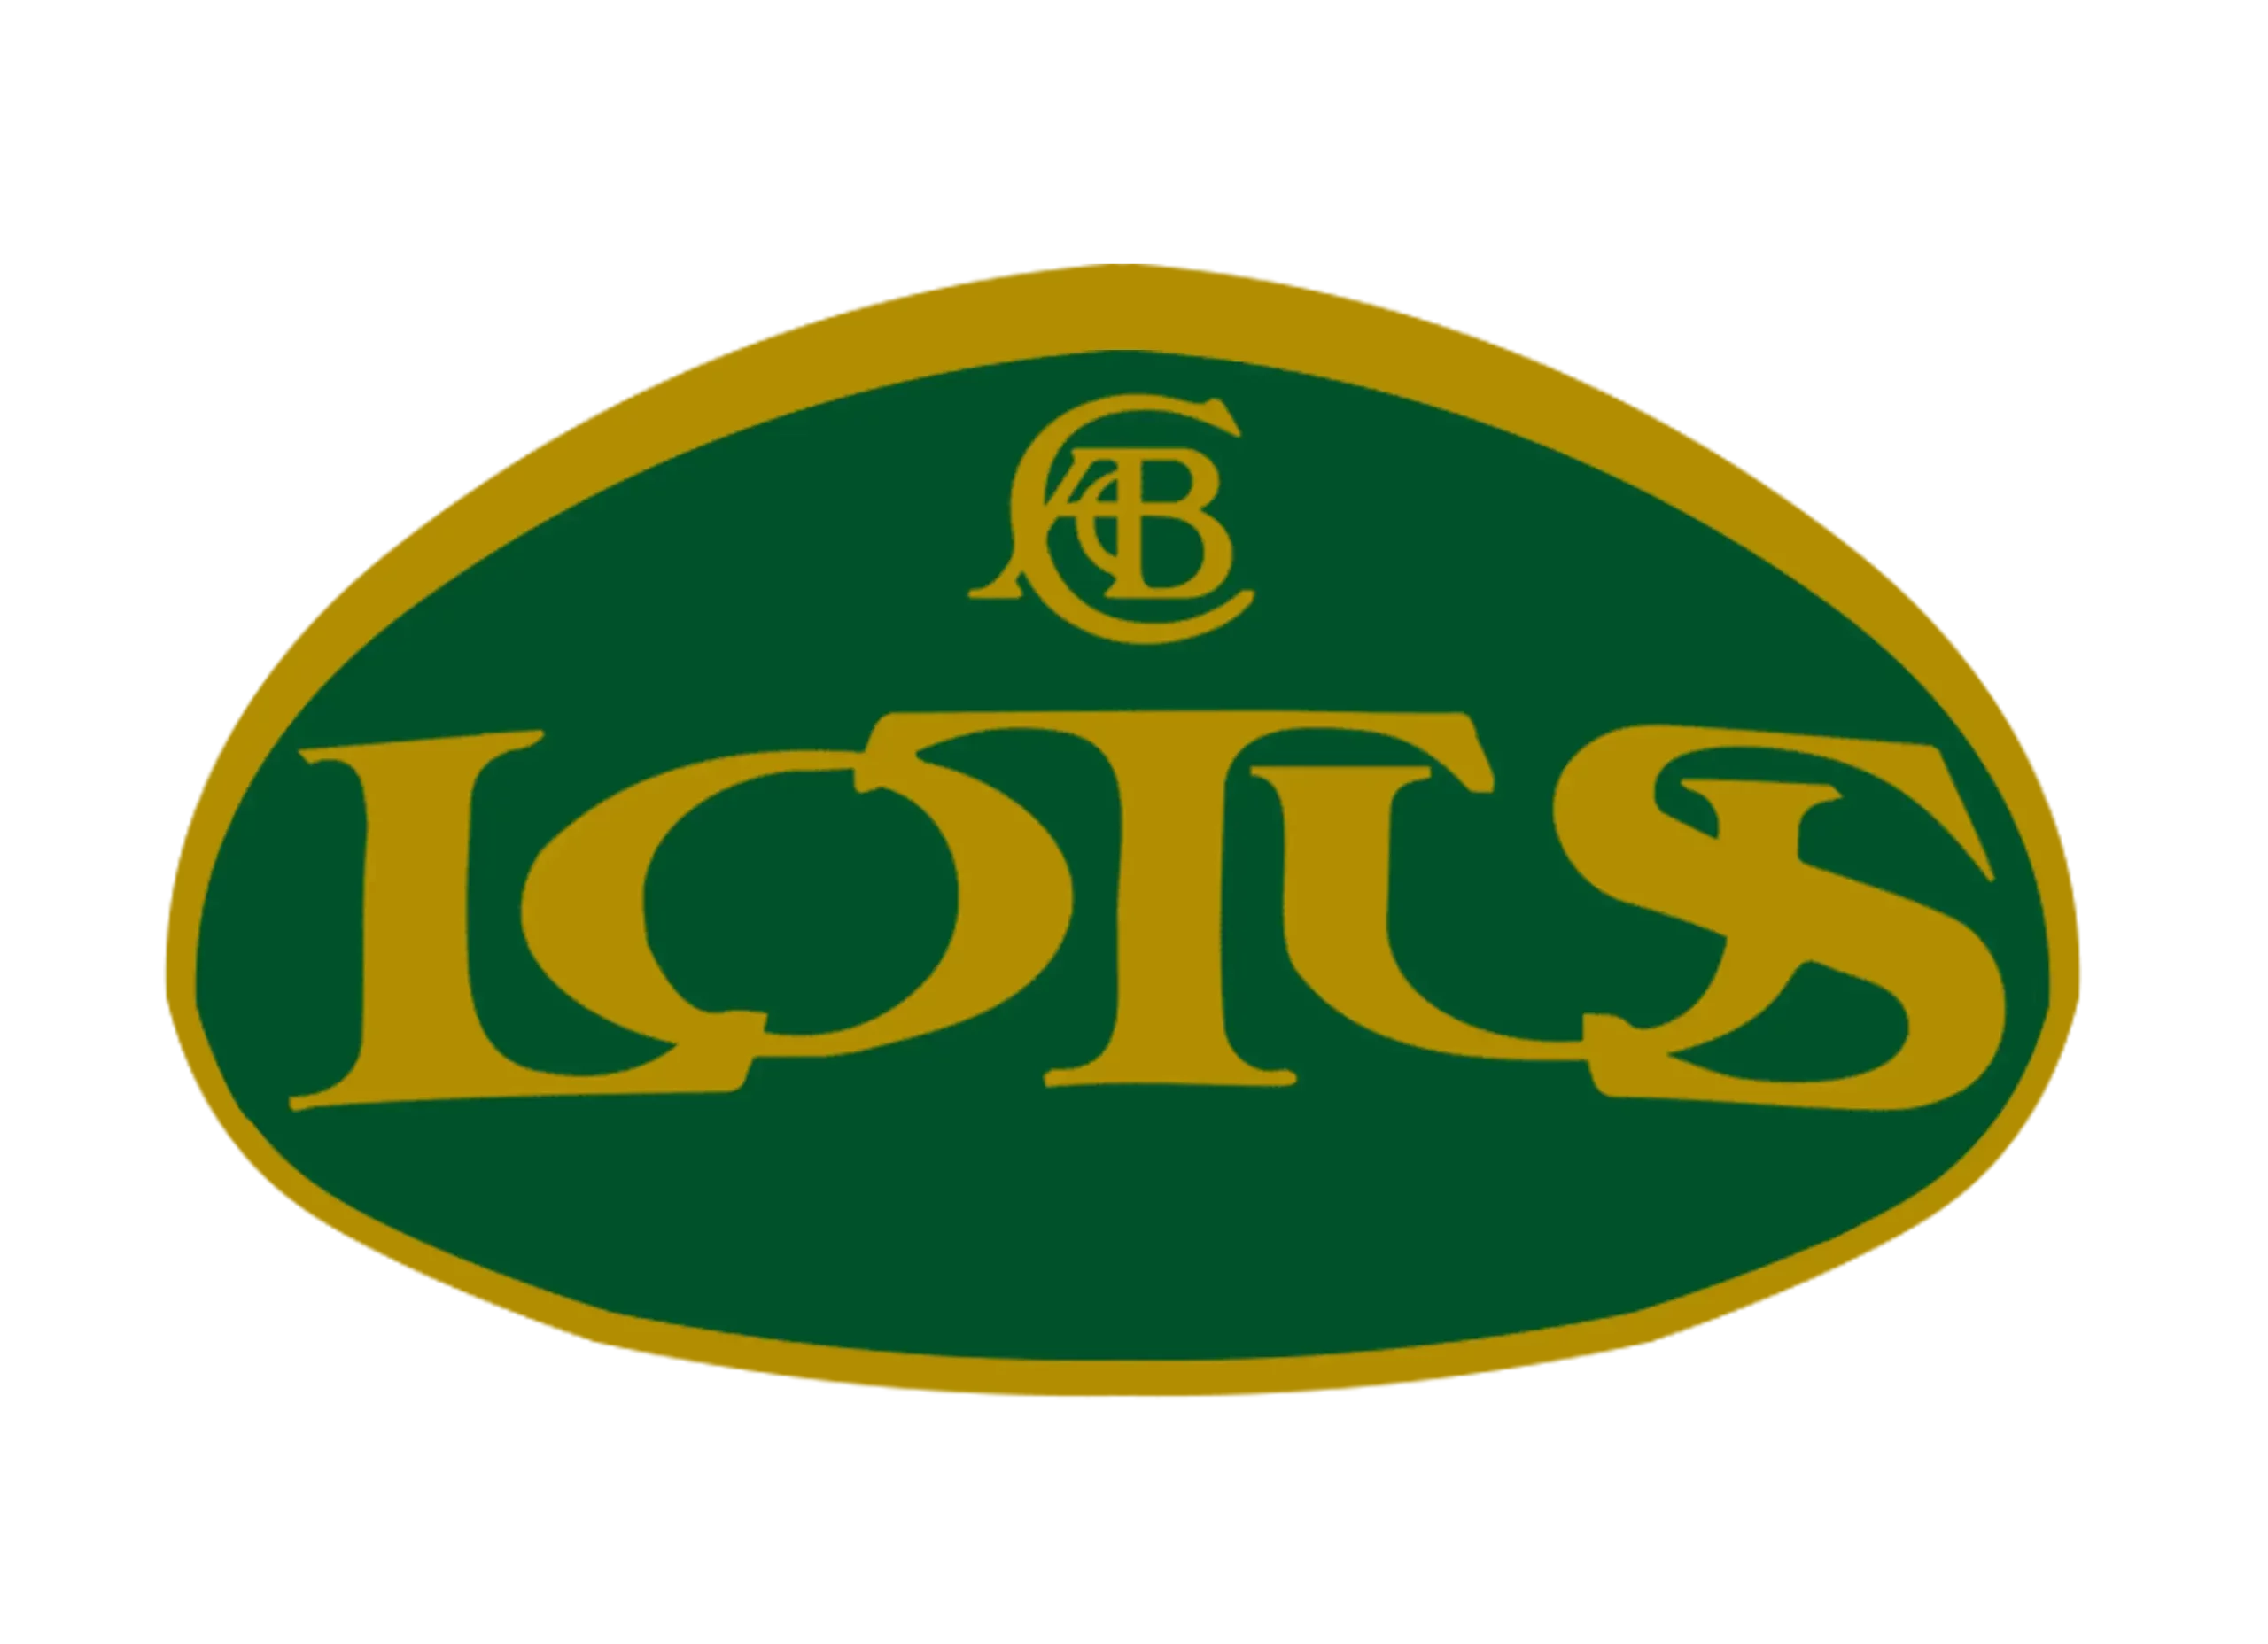 Lotus Logo and symbol, meaning, history, WebP, brand